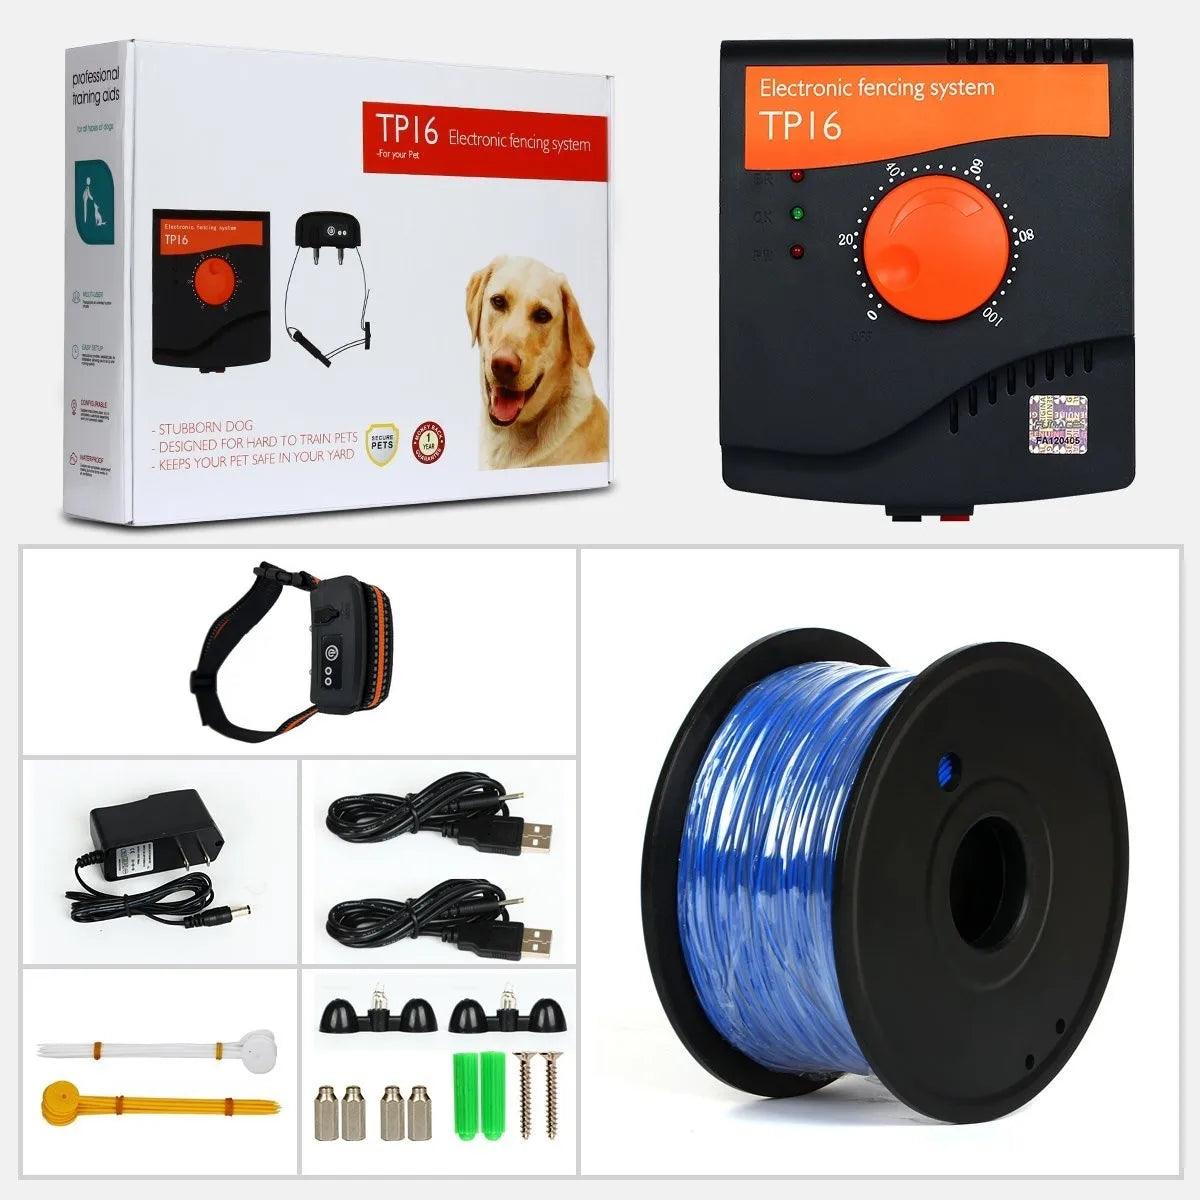 Wireless Pet Containment System with Adjustable Shock Levels and Speed Detection  ourlum.com Complete Kit 1 Dog 1  